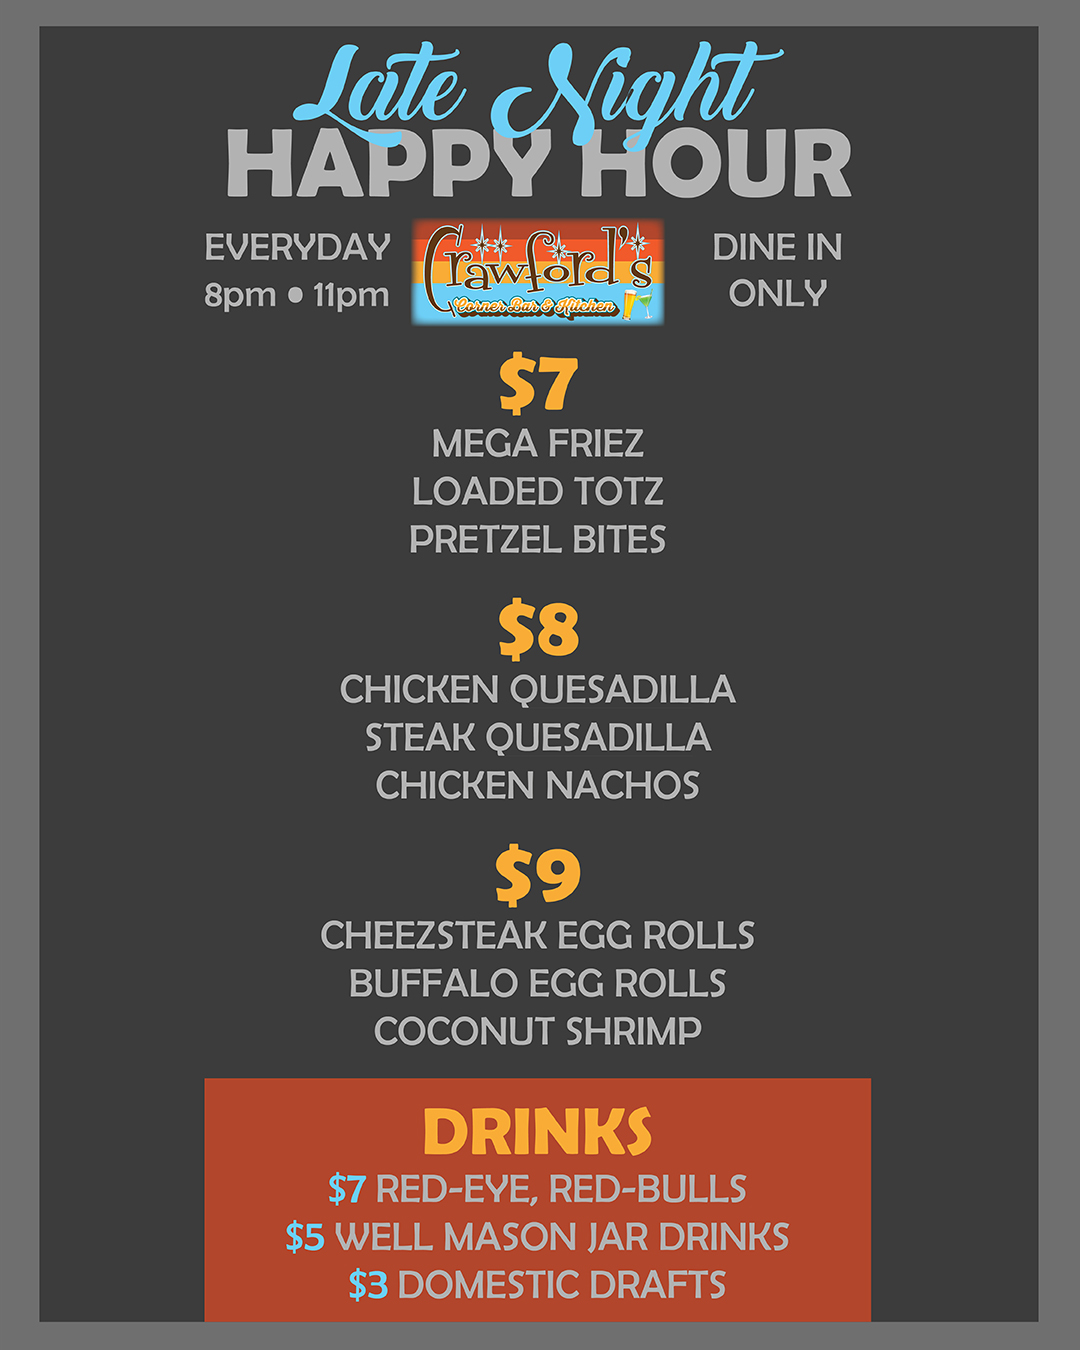 Late Night Happy Hour menu featuring food items priced at $7 and $9, plus drinks for $7, $5 well mason jar drinks, and $3 domestic drafts. Available every day from 8pm to 11pm, dine-in only.